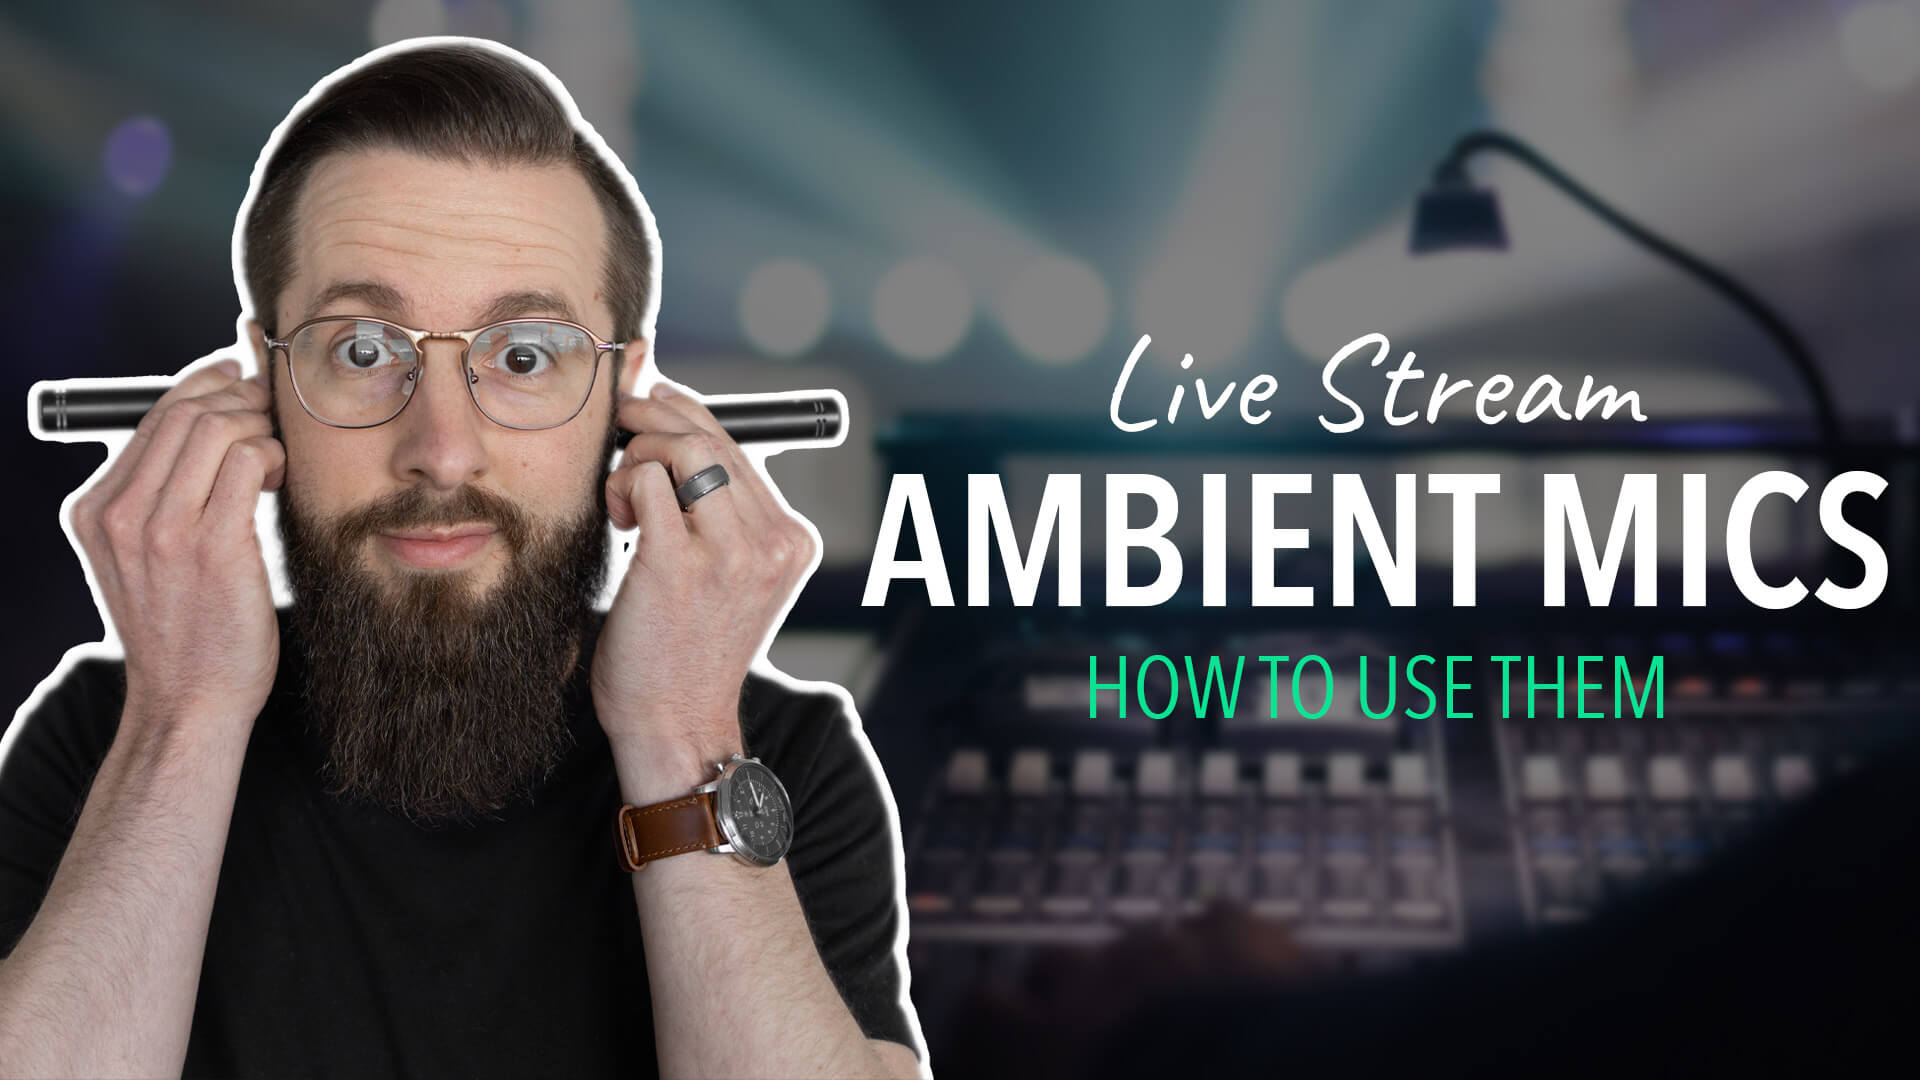 Ambient mics for live stream